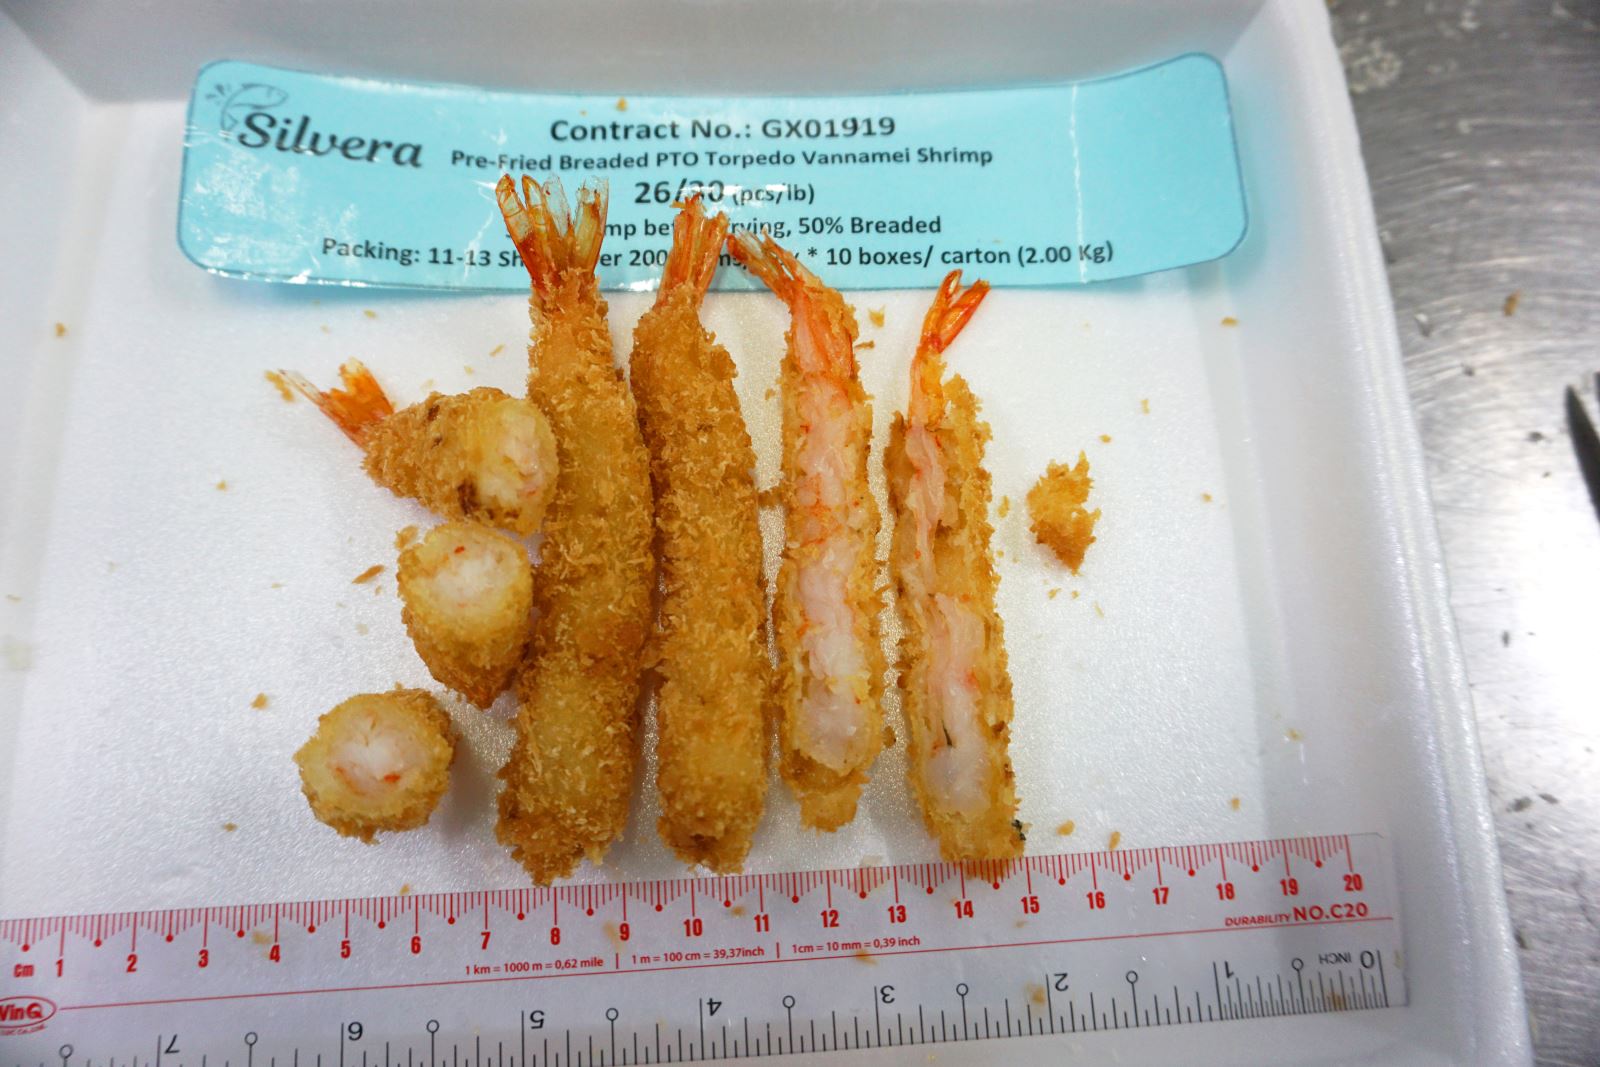 Pre-fried Breaded Torpedo Vannamei Shrimp After Being Cooked 